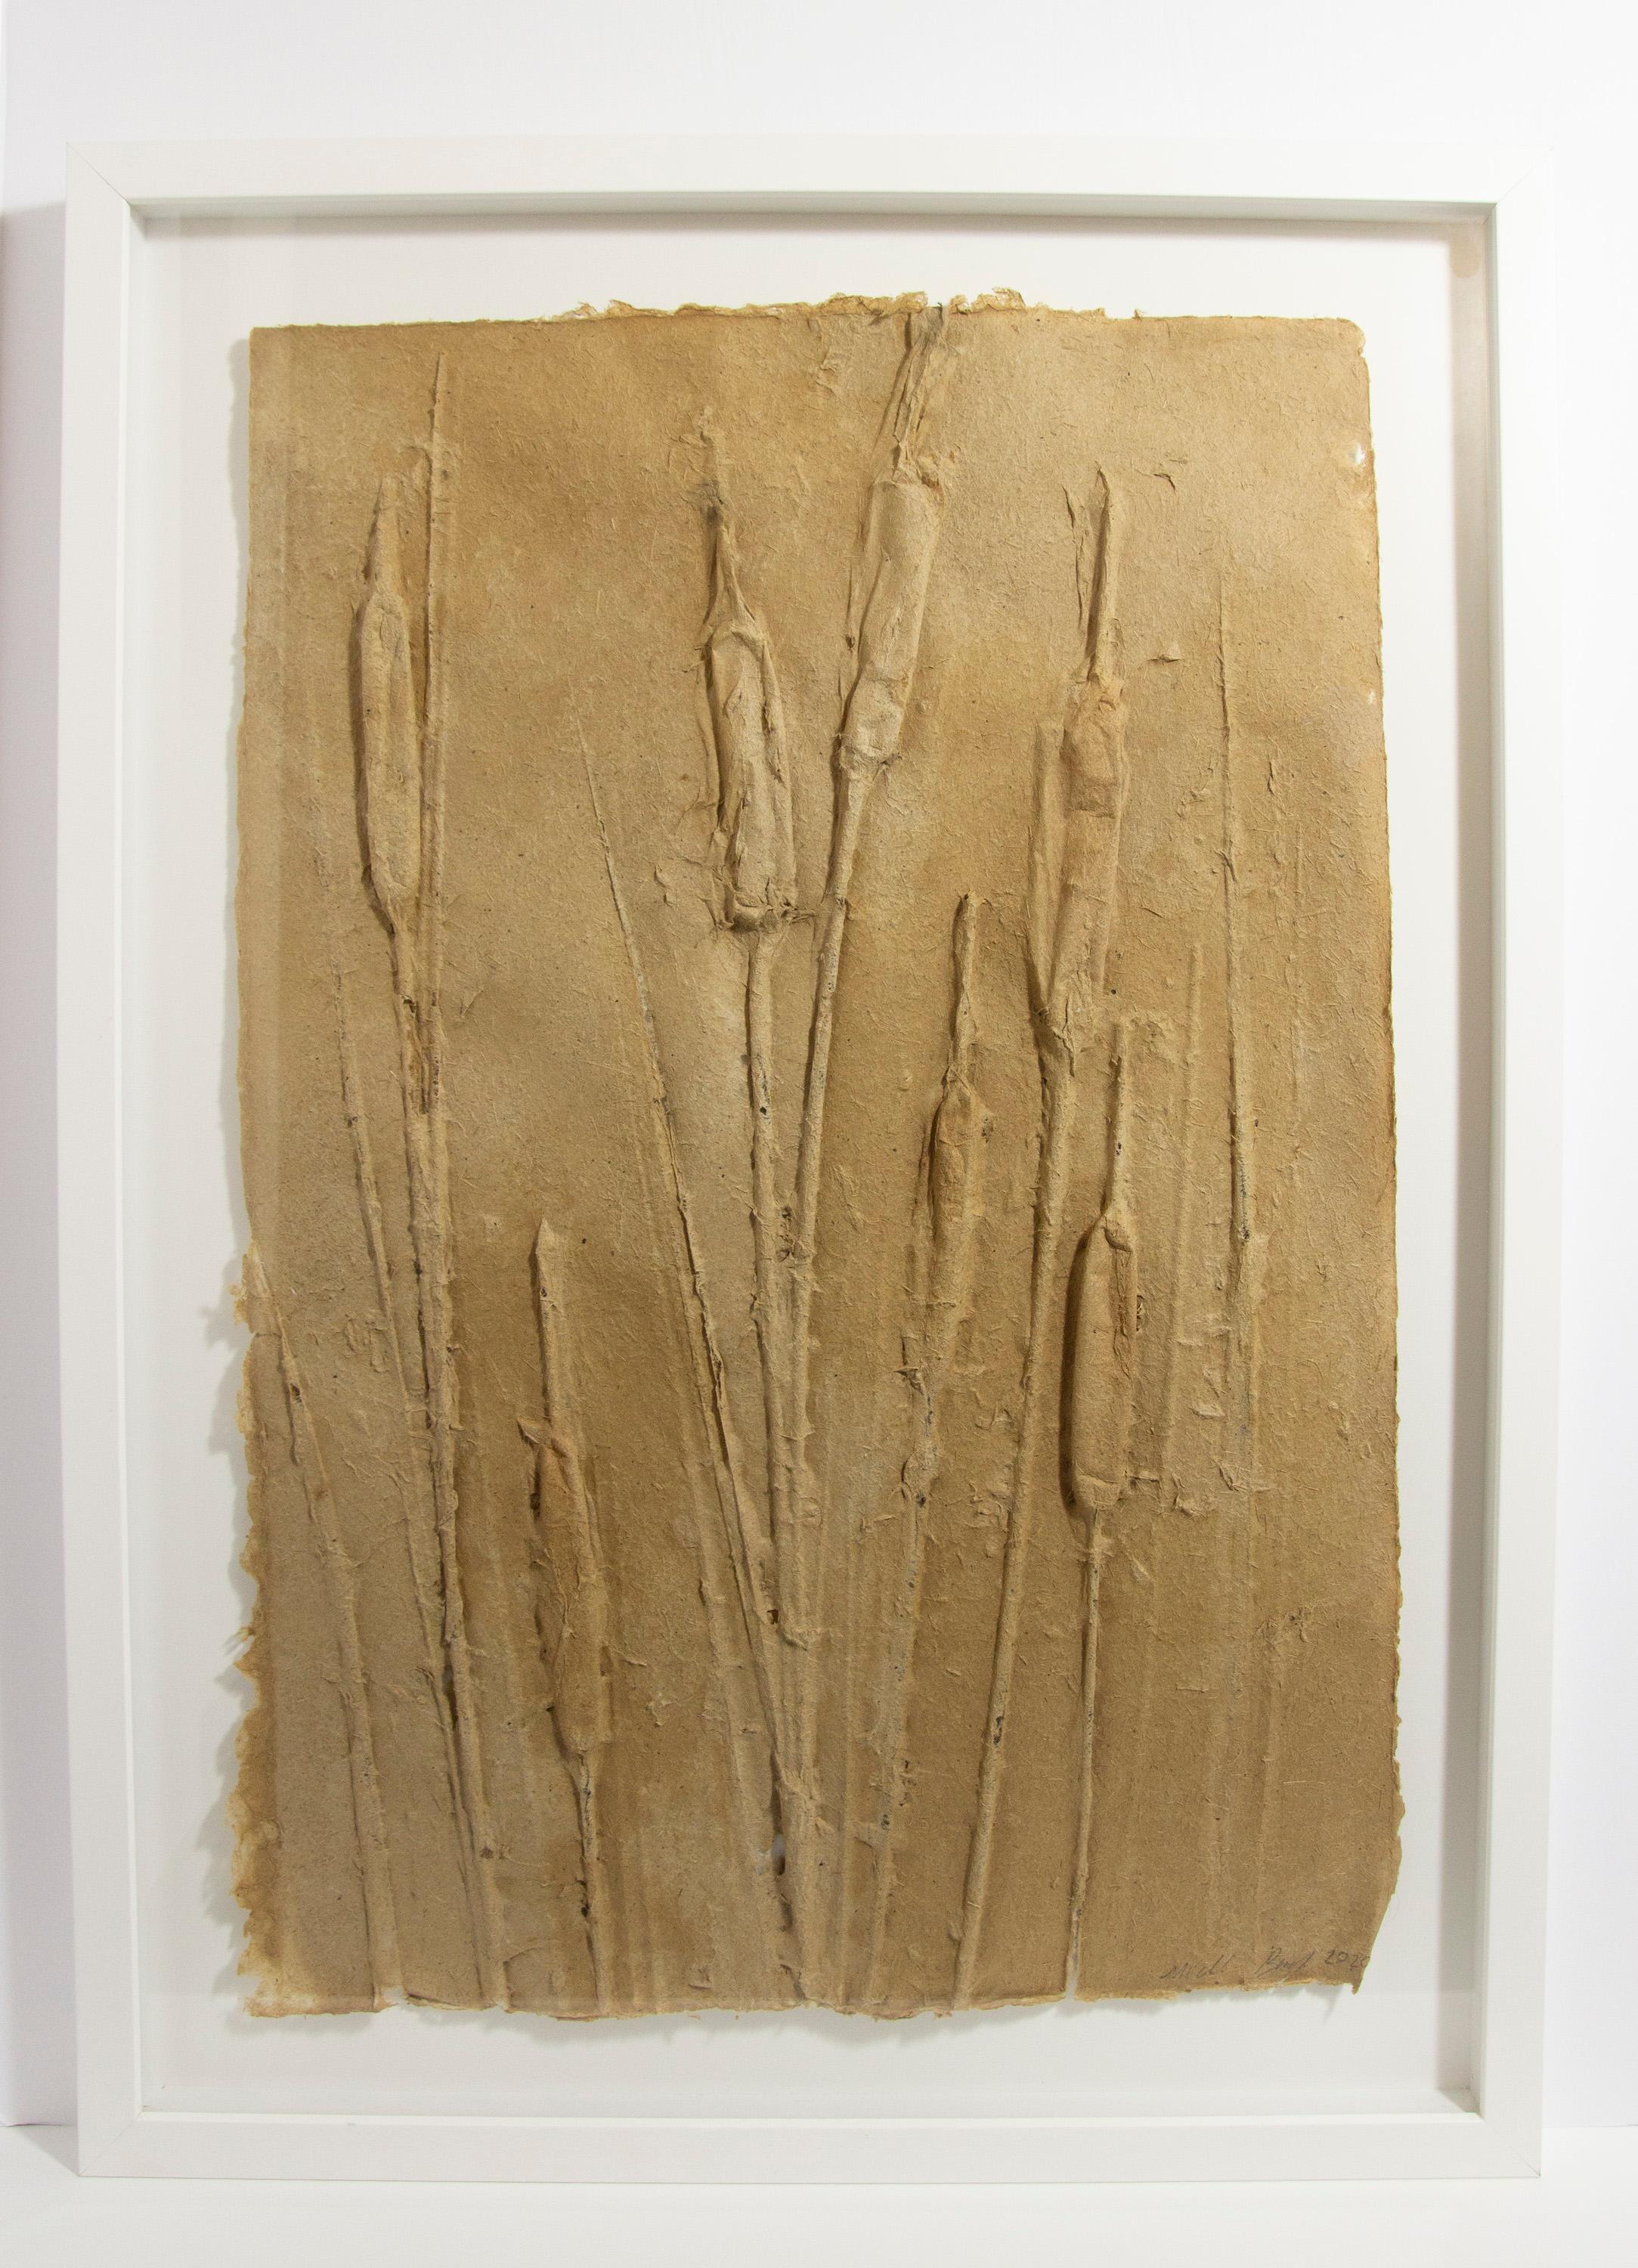 Michele Brody, Nature in Absentia: Cattails Plucked Out, Handmade Cast Paper

The essence of Michele Brody’s work thrives on the interaction with new communities and place-making. Once there, she explores what it means to establish roots within an